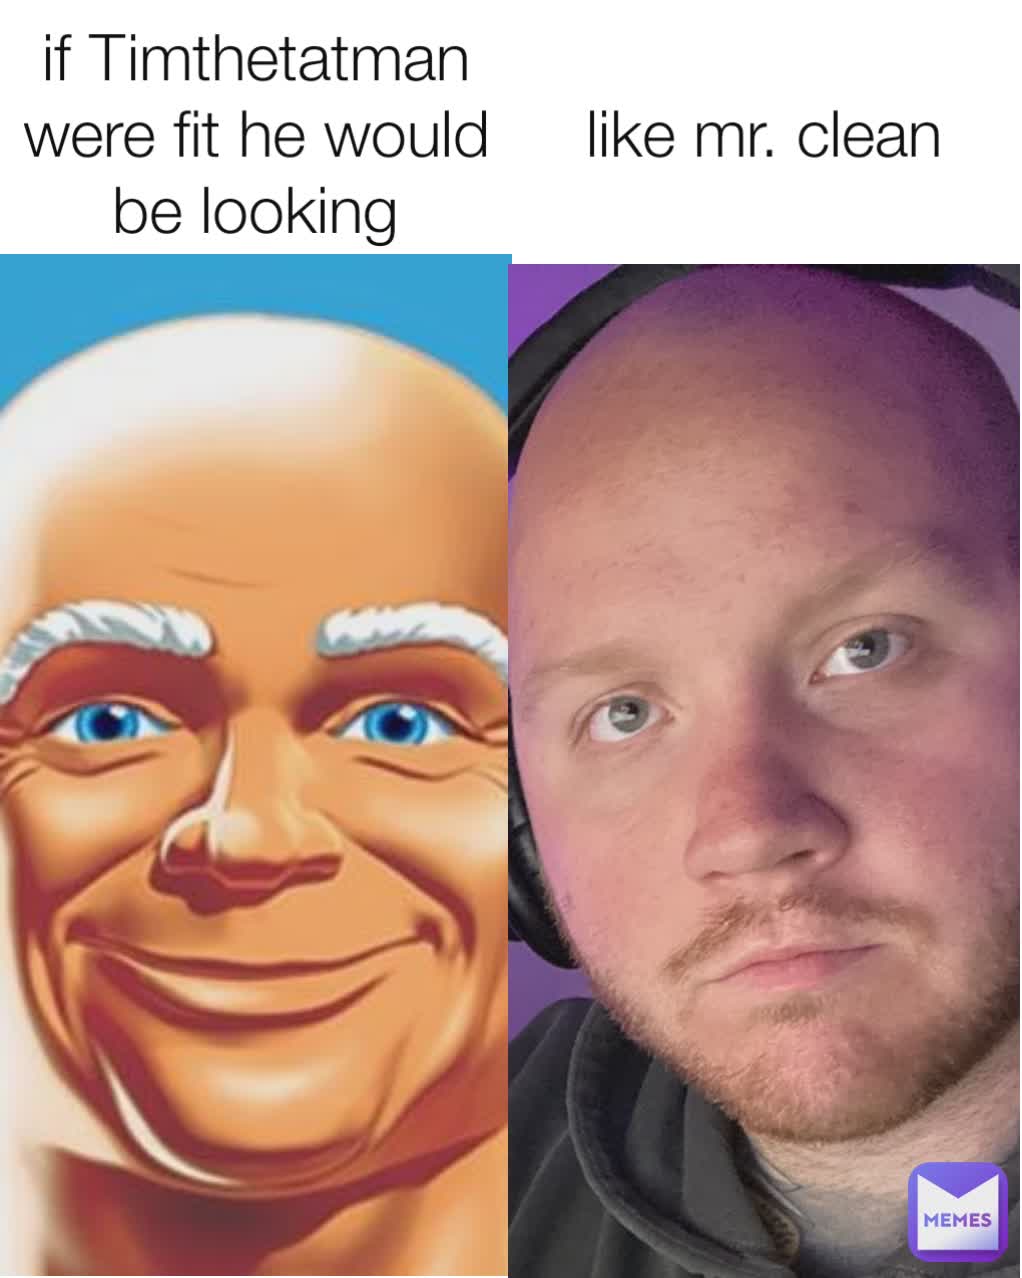 if Timthetatman were fit he would be looking like mr. clean